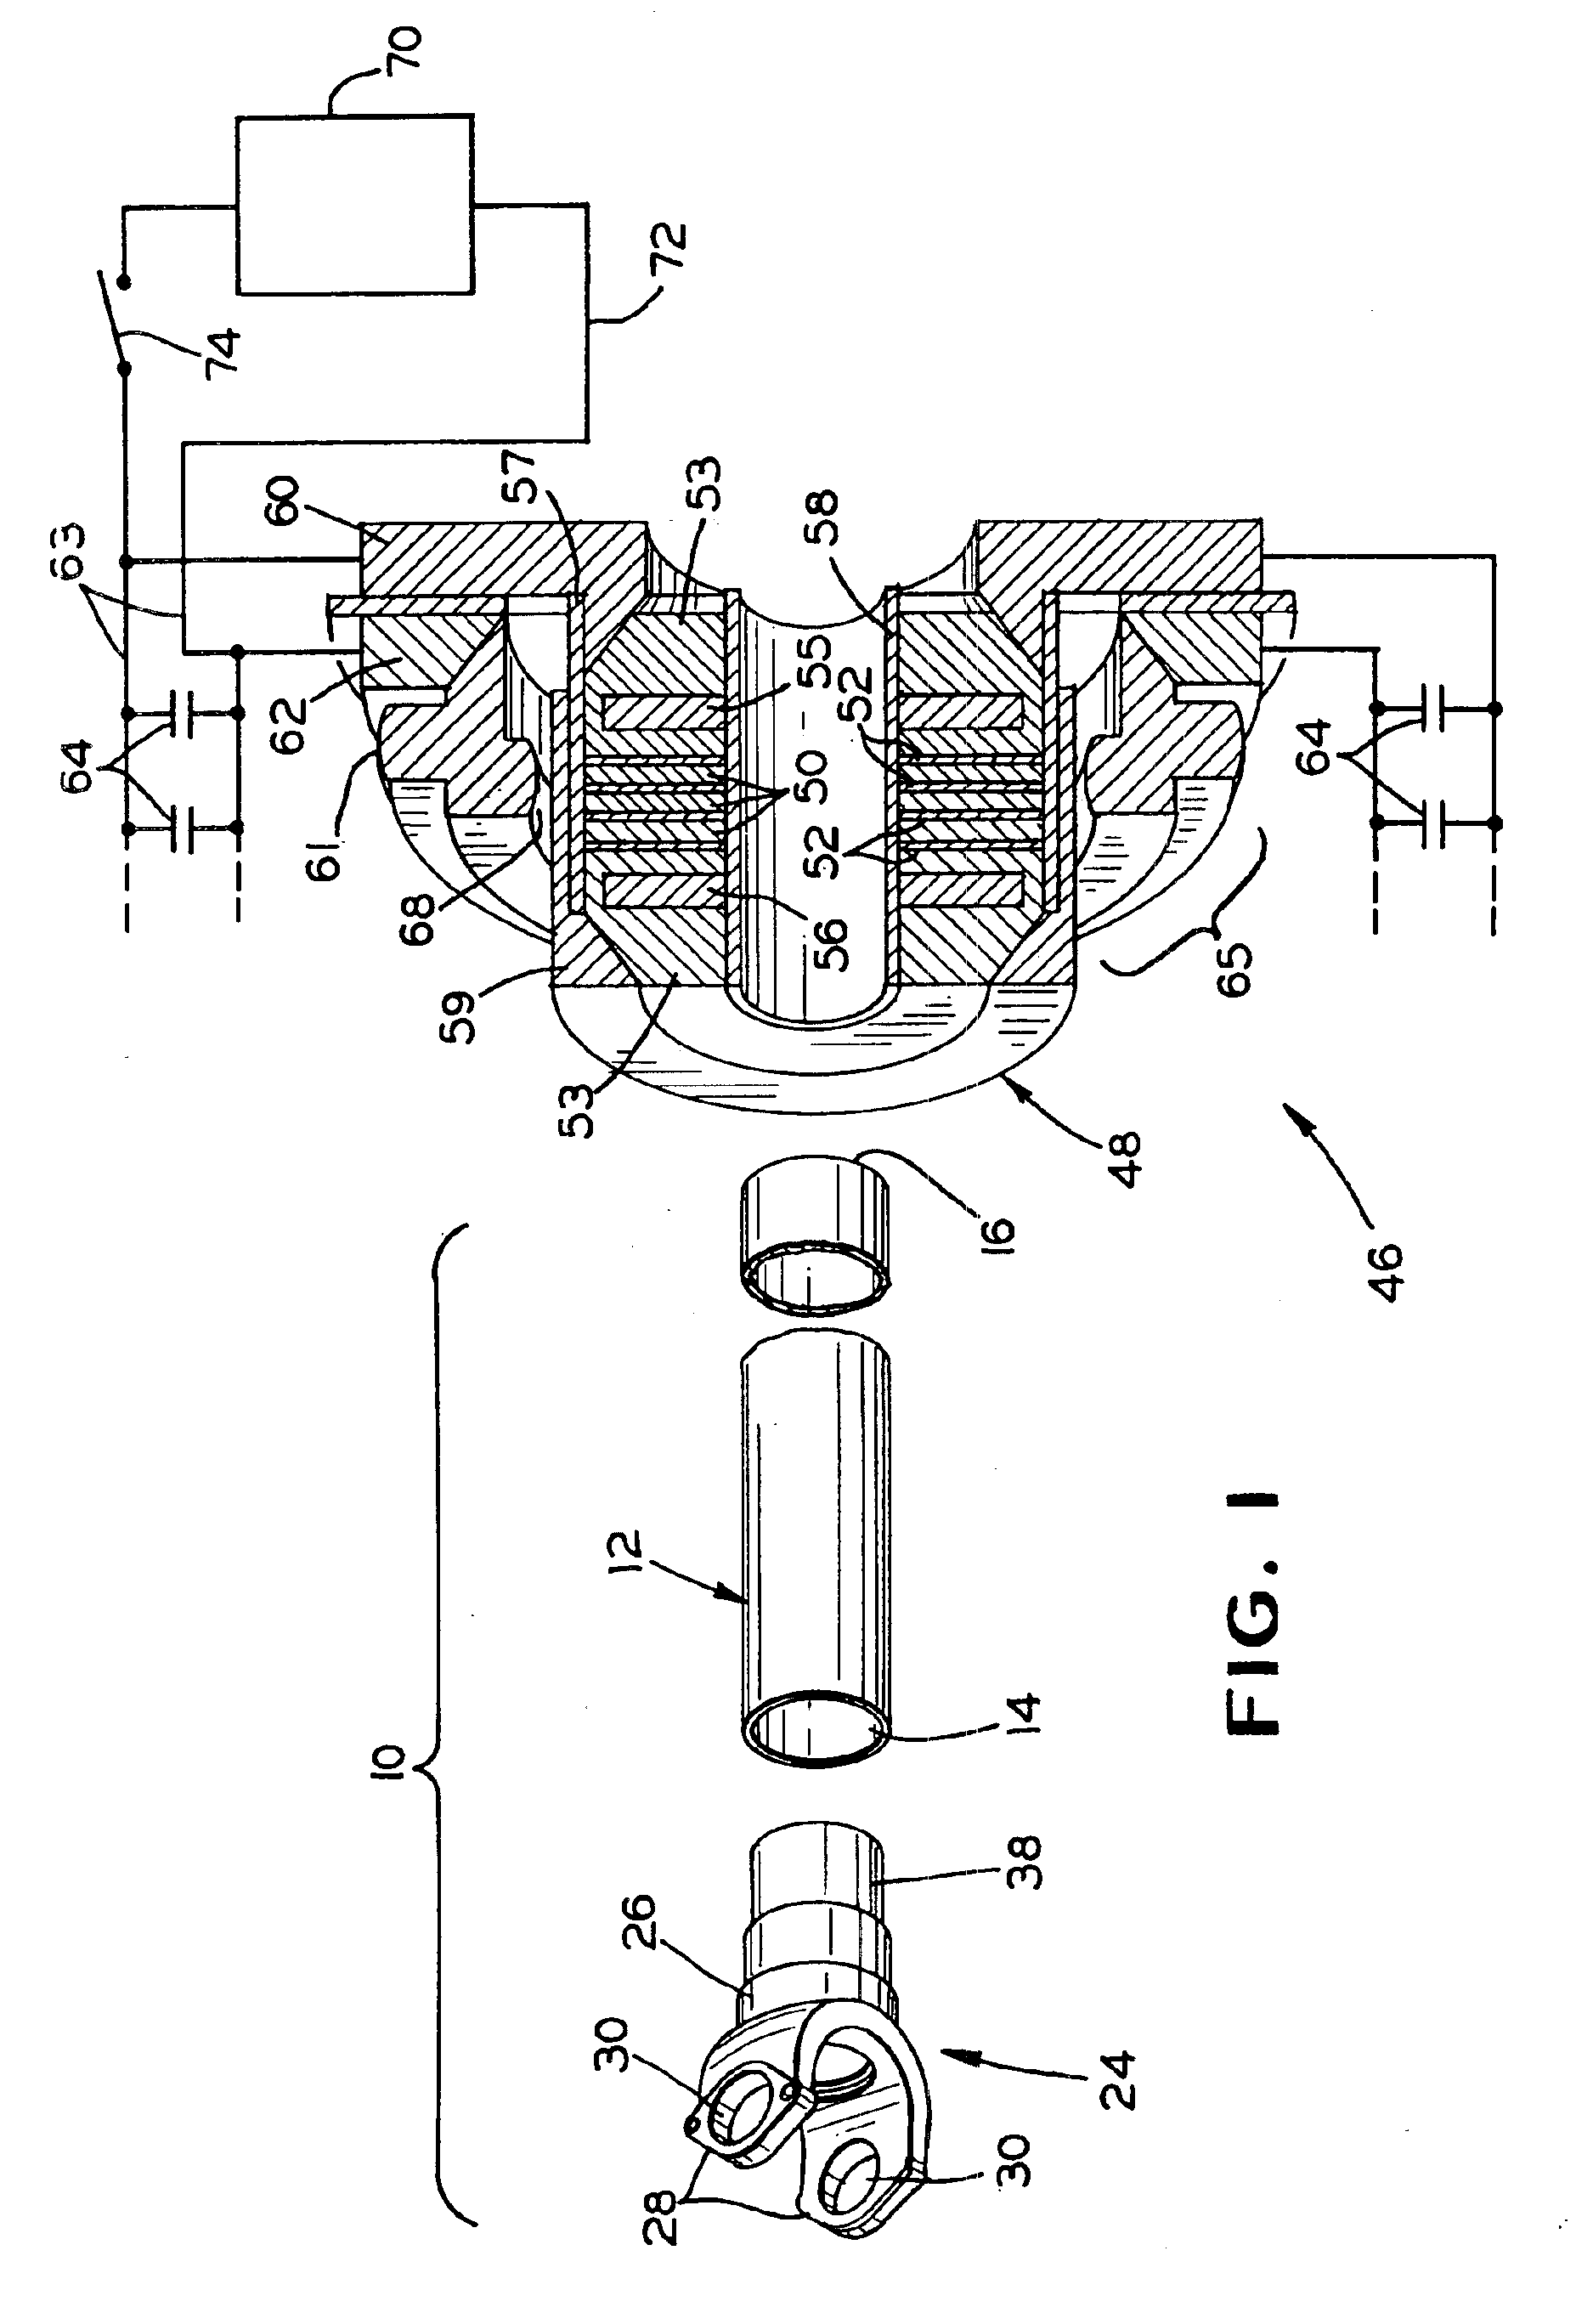 Method of magnetic pulse welding an end fitting to a driveshaft tube of a vehicular driveshaft